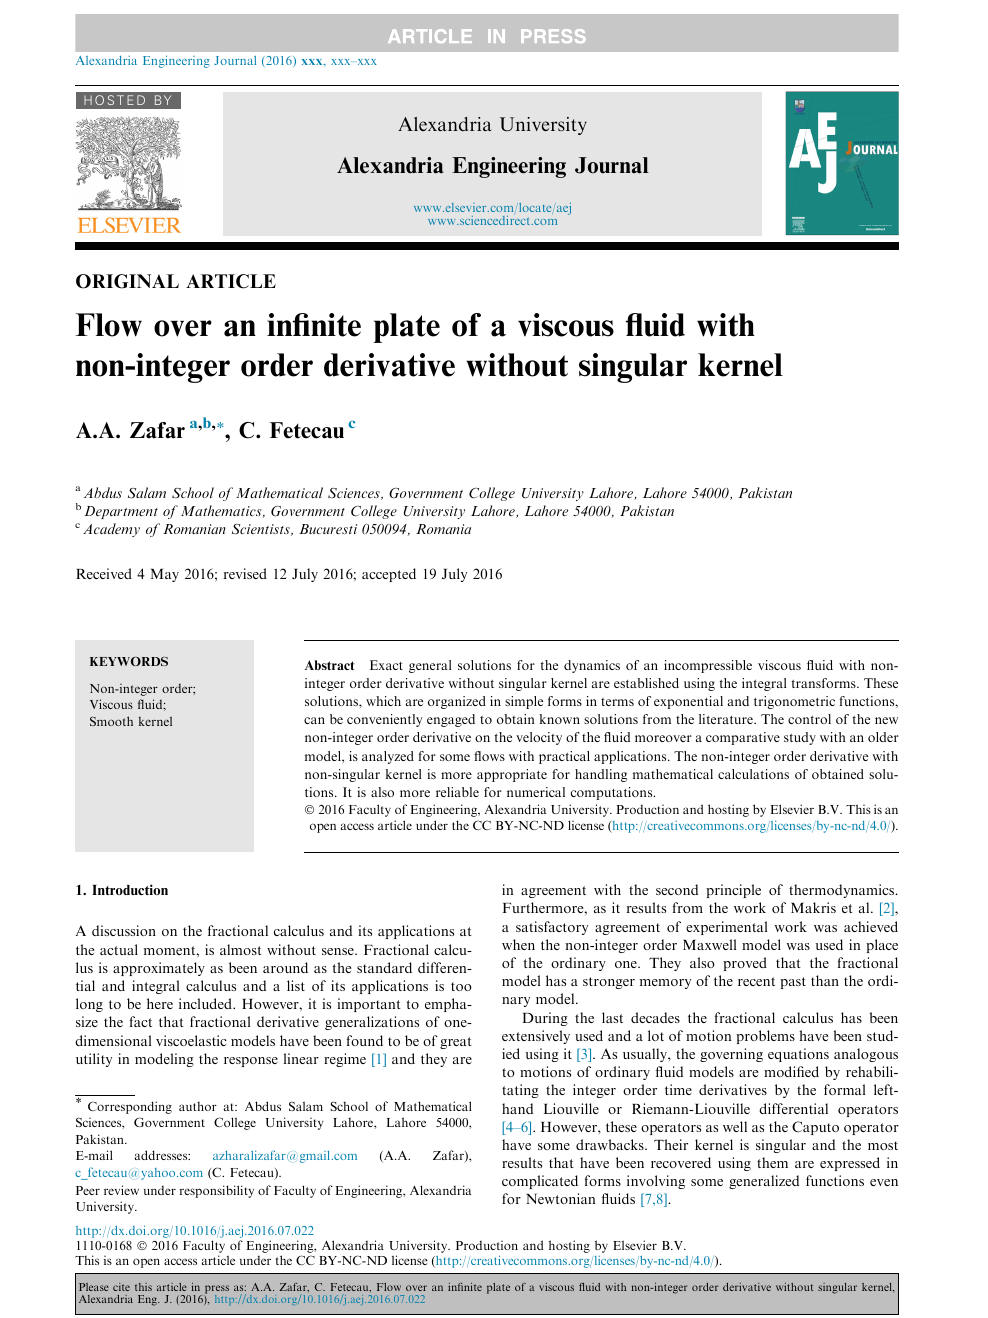 Flow Over An Infinite Plate Of A Viscous Fluid With Non Integer Order Derivative Without Singular Kernel Topic Of Research Paper In Mathematics Download Scholarly Article Pdf And Read For Free On